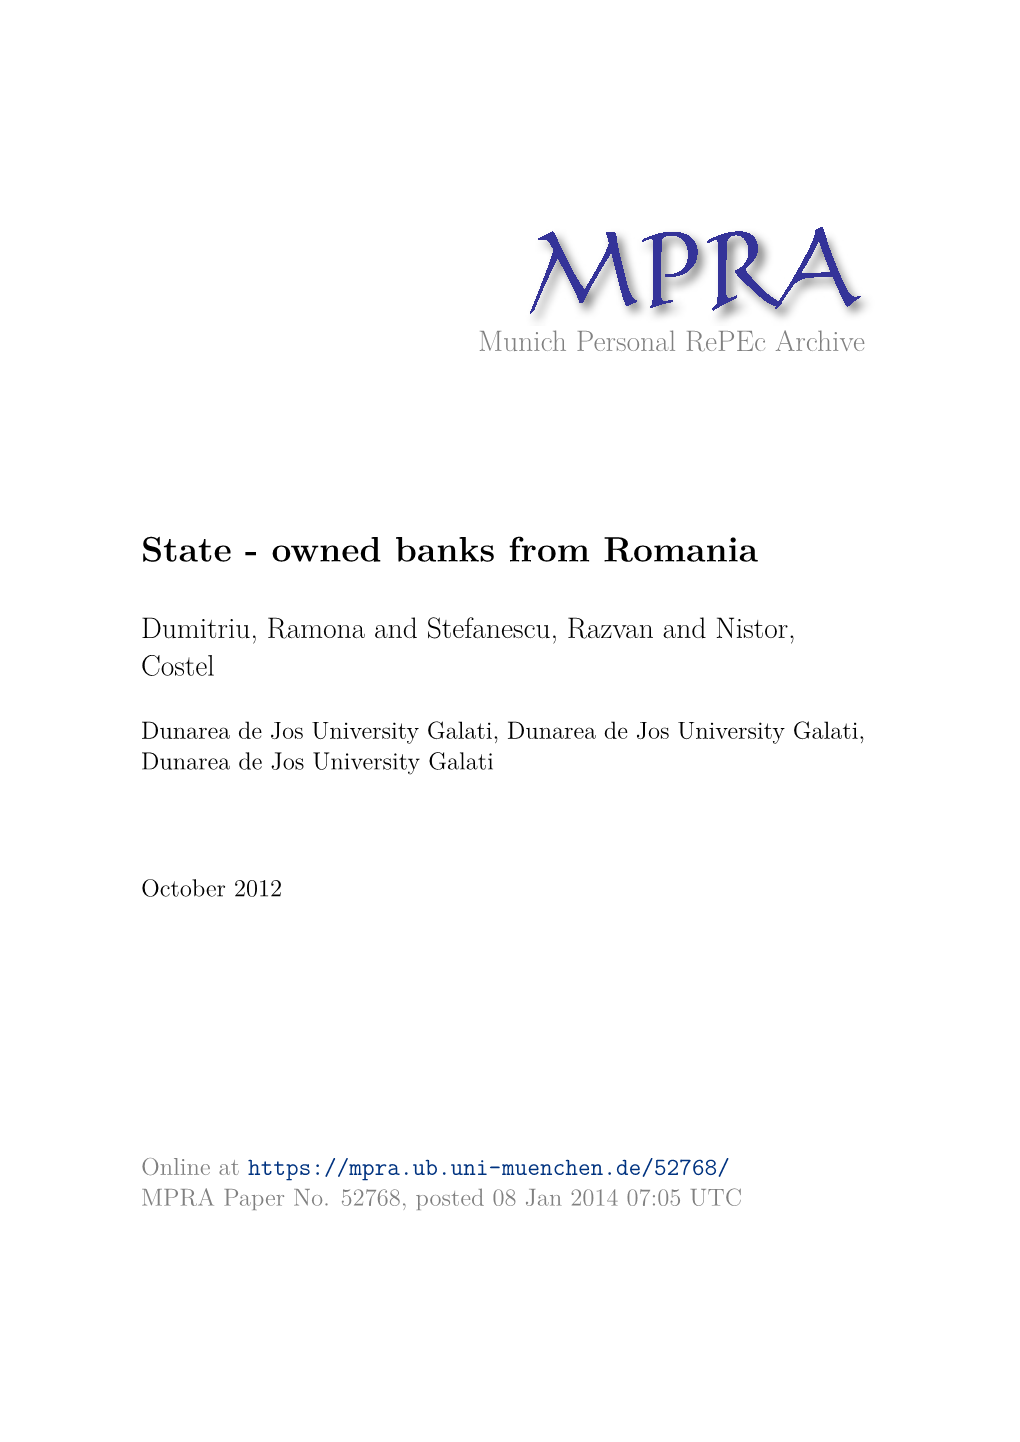 State - Owned Banks from Romania